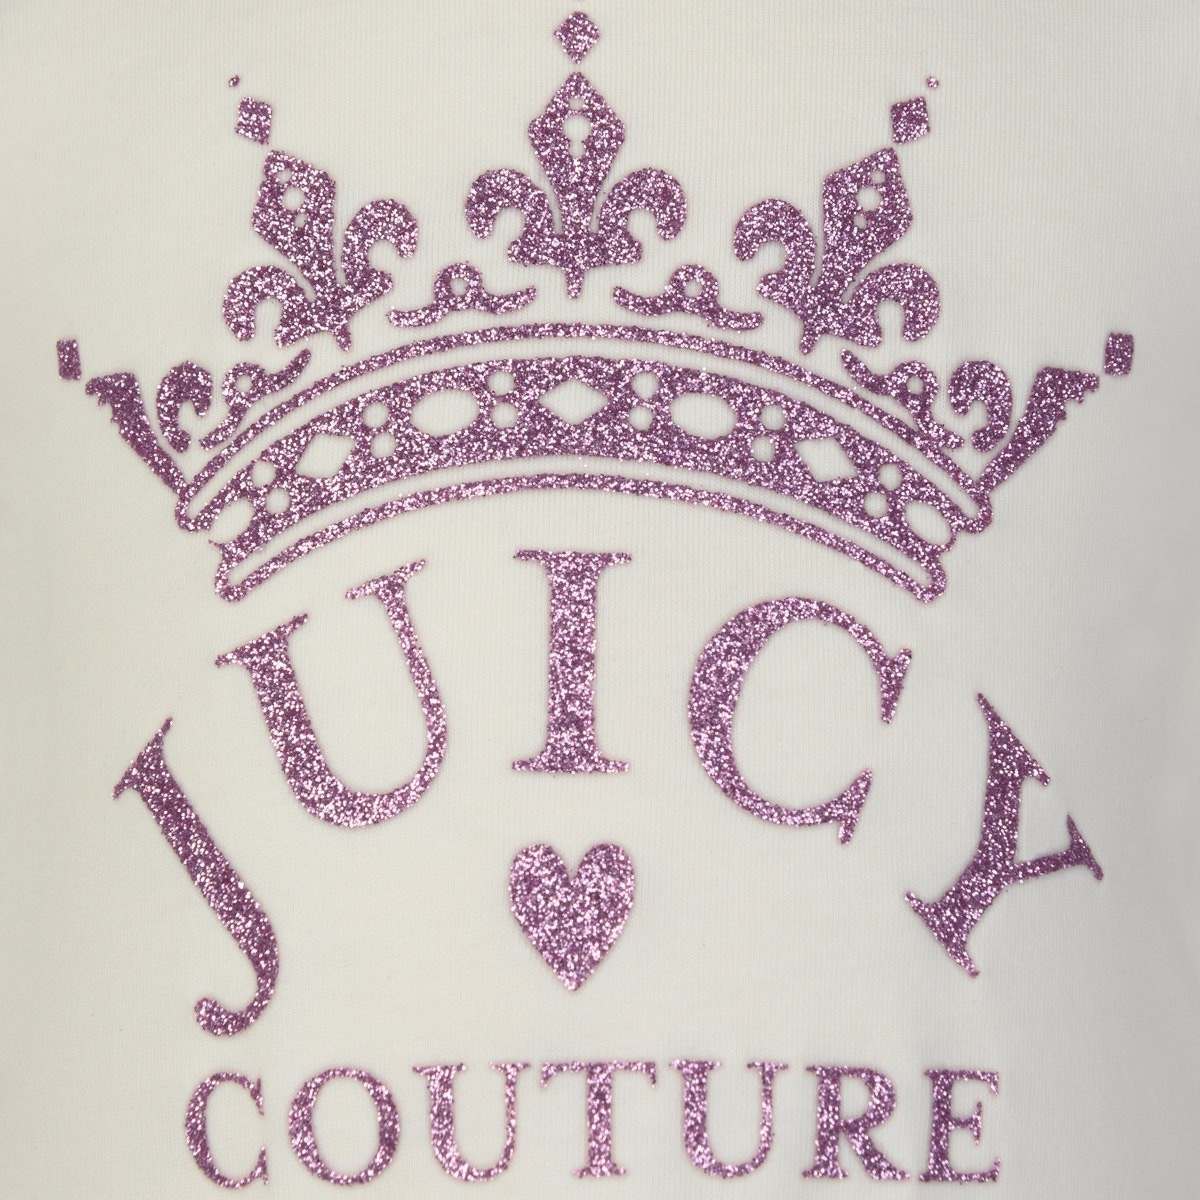 Juicy Couture Crown Logo - Juicy Couture Baby Girls Ivory & Pink Crown Top - Girl